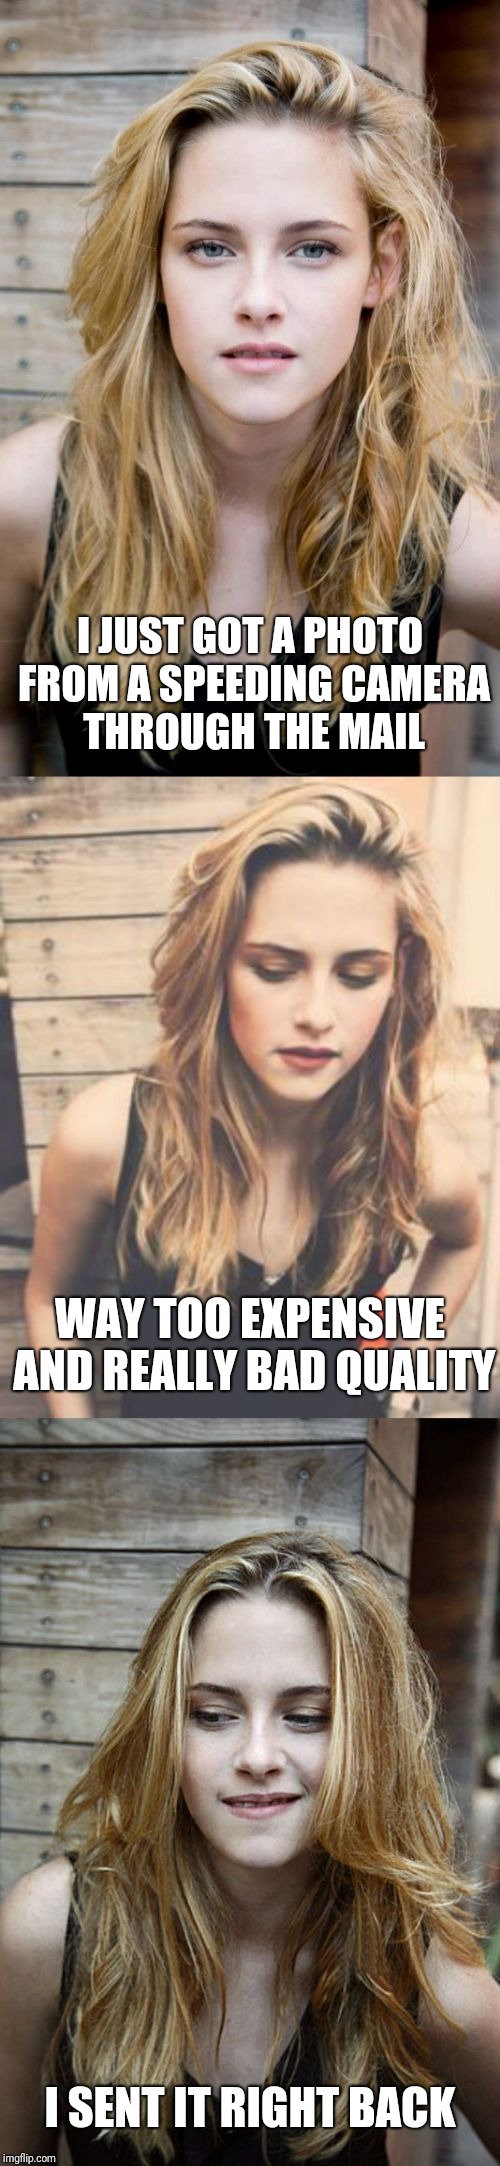 Bad Pun Kristen Stewart 2 | I JUST GOT A PHOTO FROM A SPEEDING CAMERA THROUGH THE MAIL; WAY TOO EXPENSIVE AND REALLY BAD QUALITY; I SENT IT RIGHT BACK | image tagged in bad pun kristen stewart 2,fail week | made w/ Imgflip meme maker